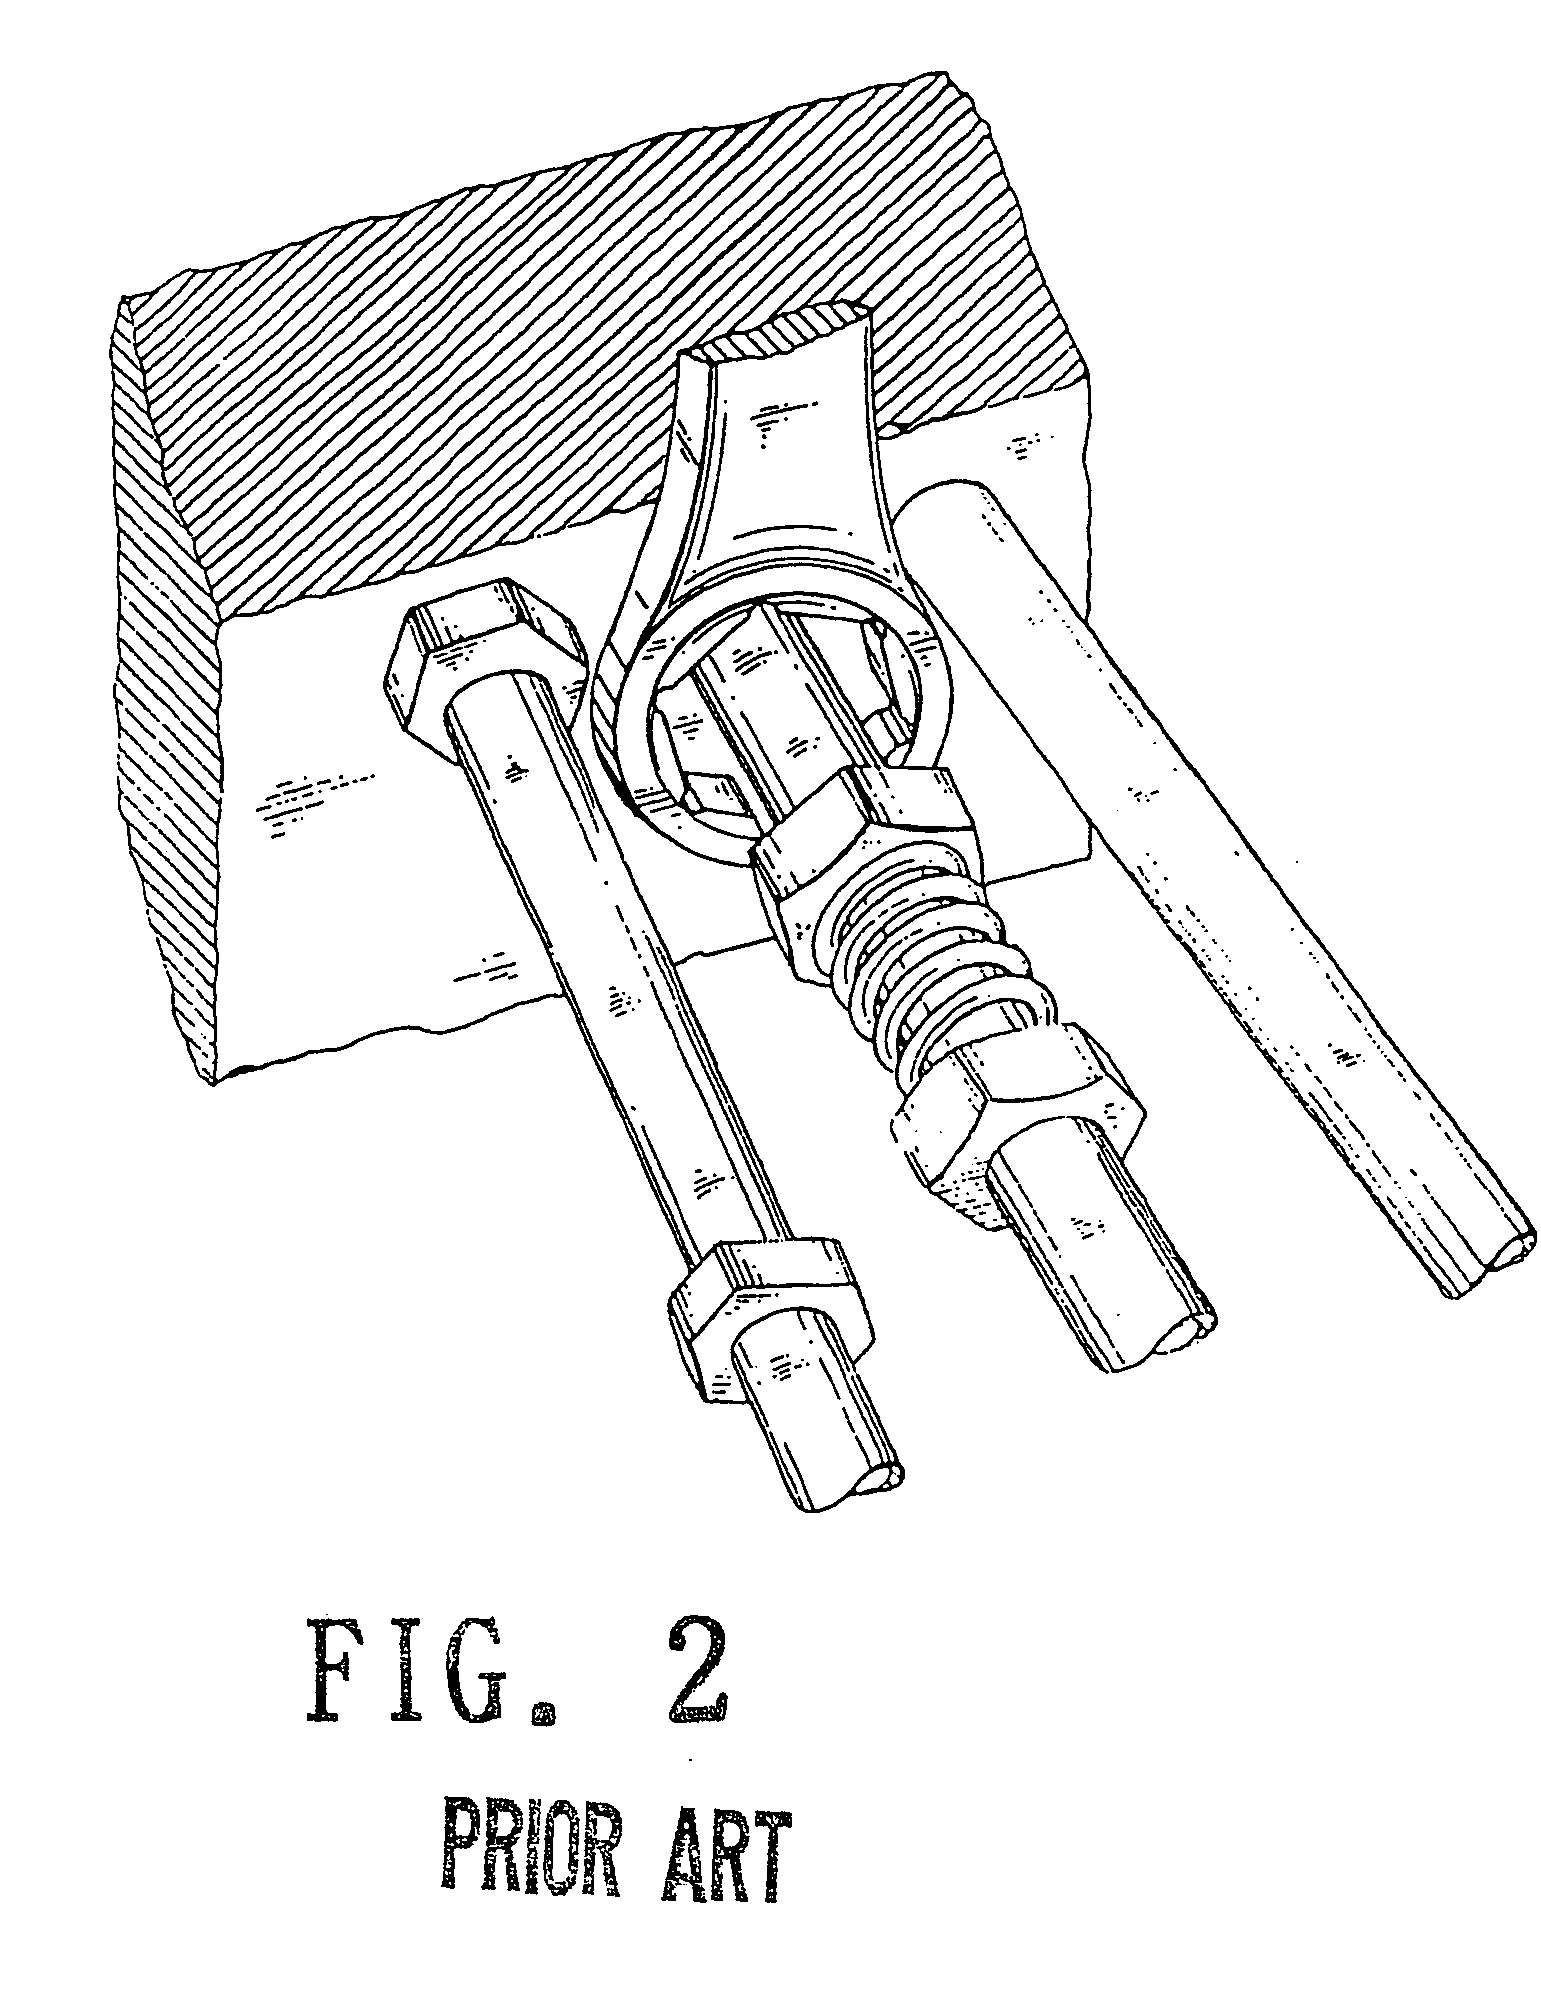 Pipe wrench having a fixed positioning ring